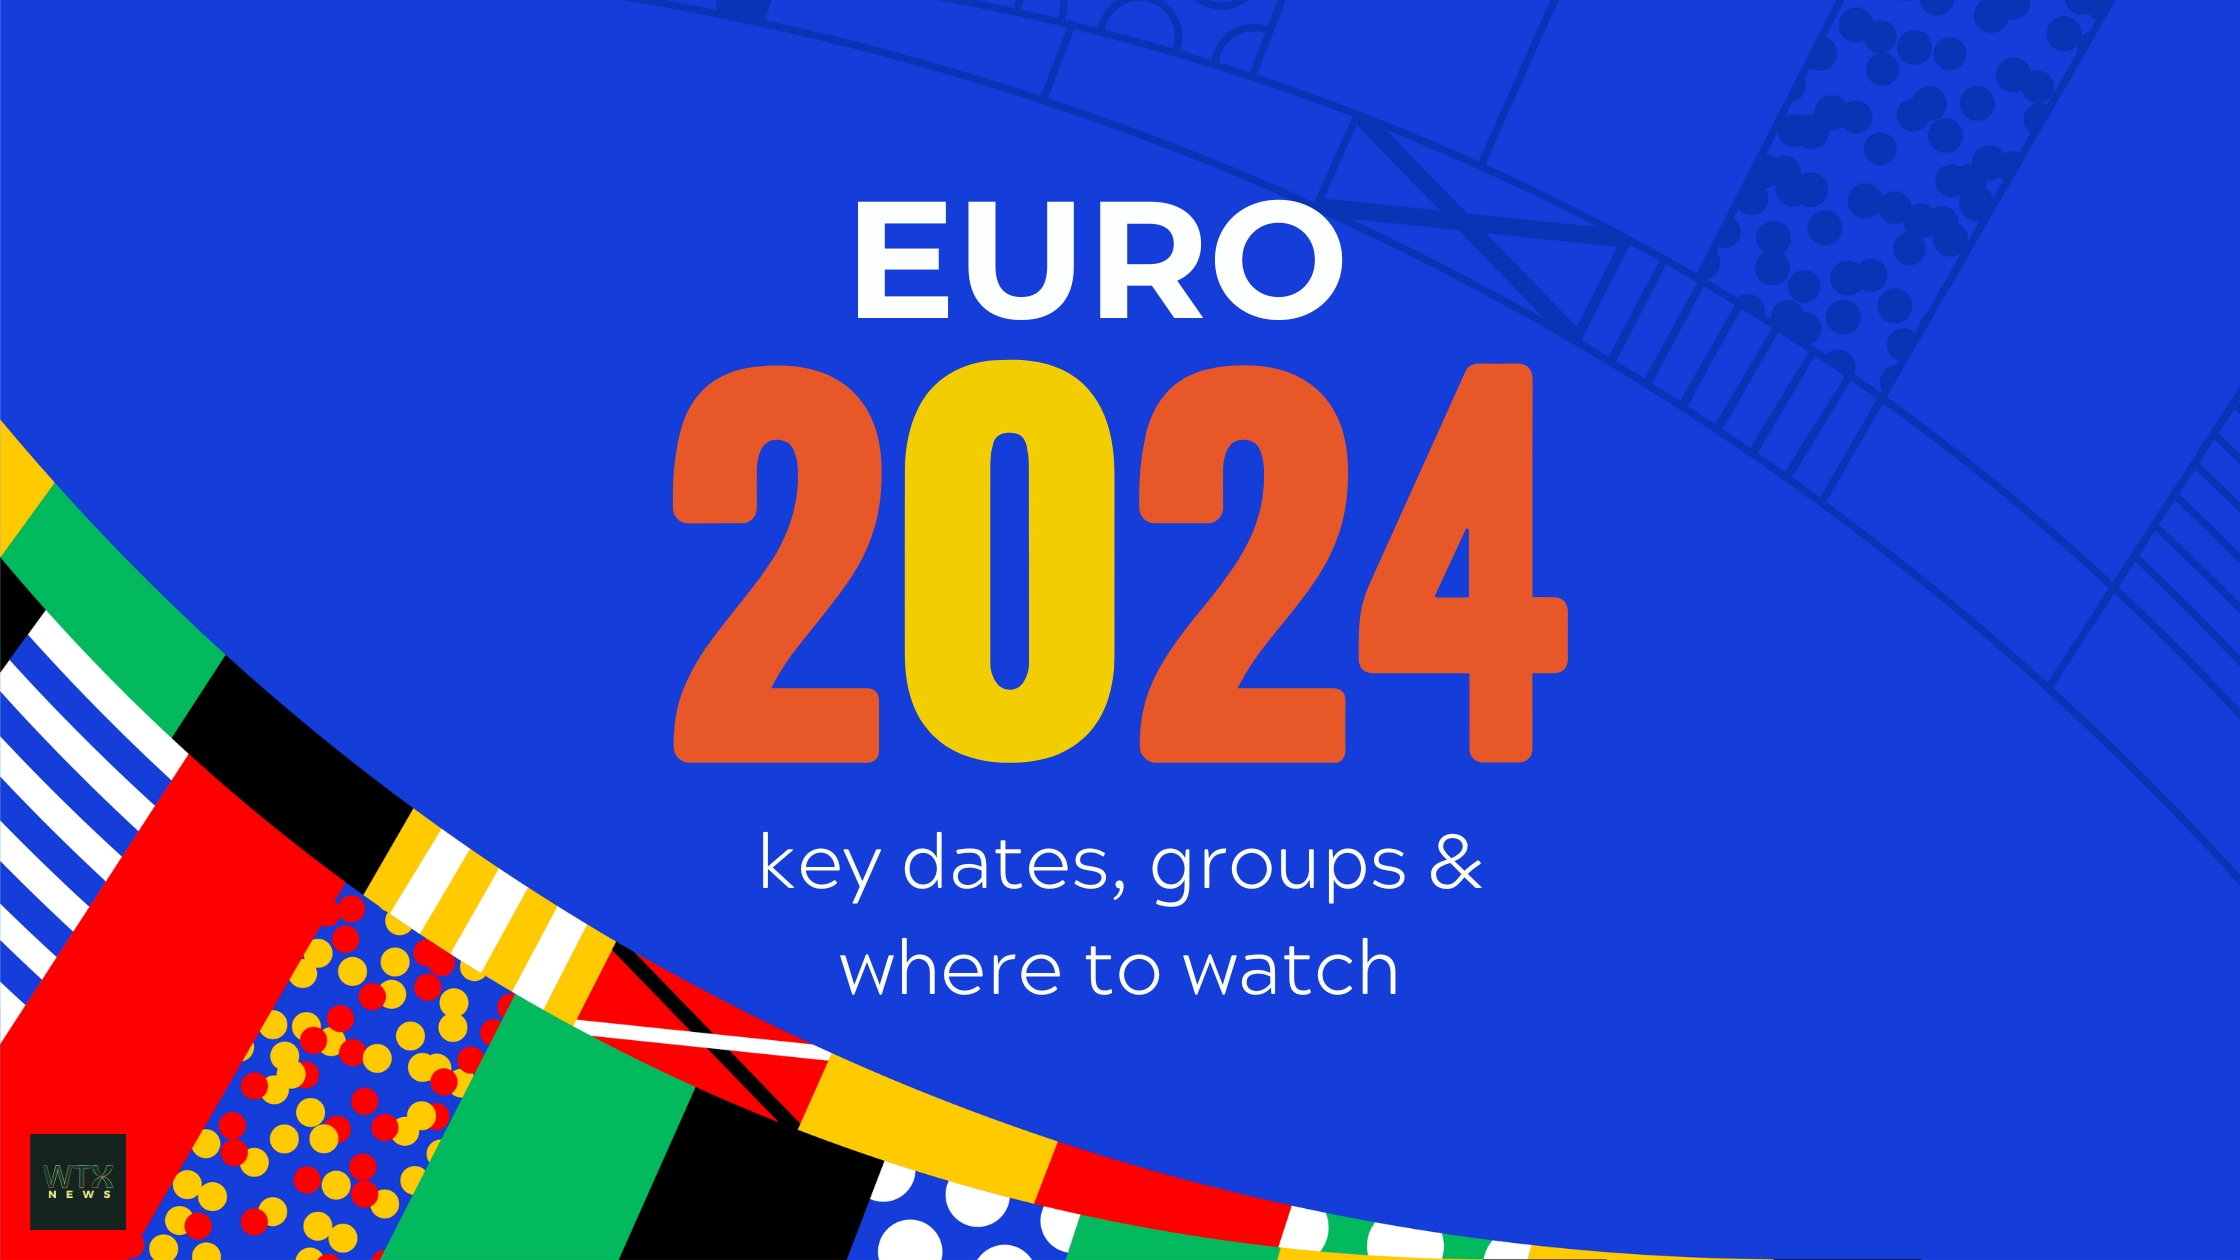 EURO 2024 Guide: key dates, groups, where to watch